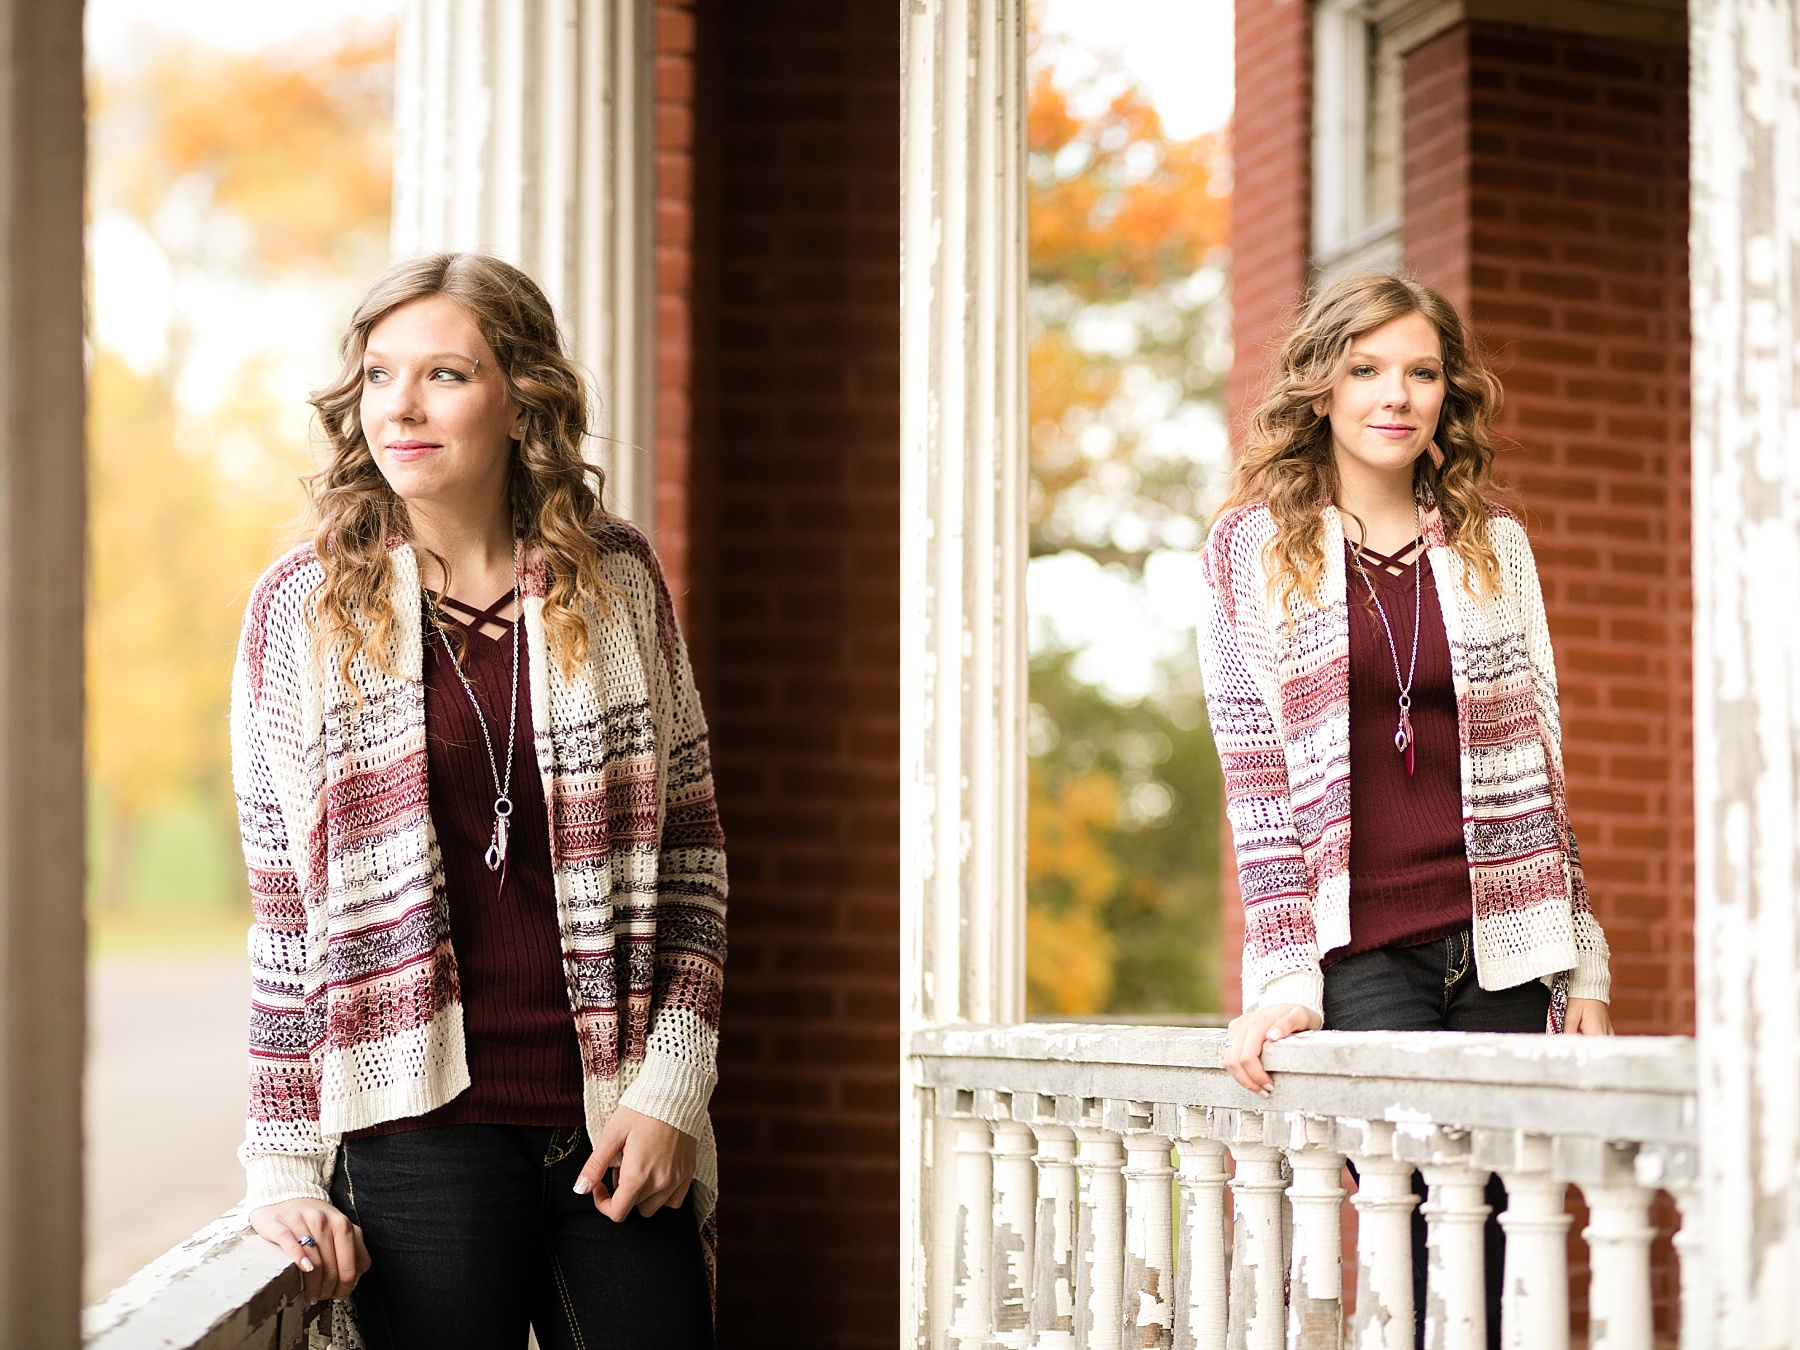 Haley's Eau Claire senior photos were the perfect mix of summer bleeding over into fall.